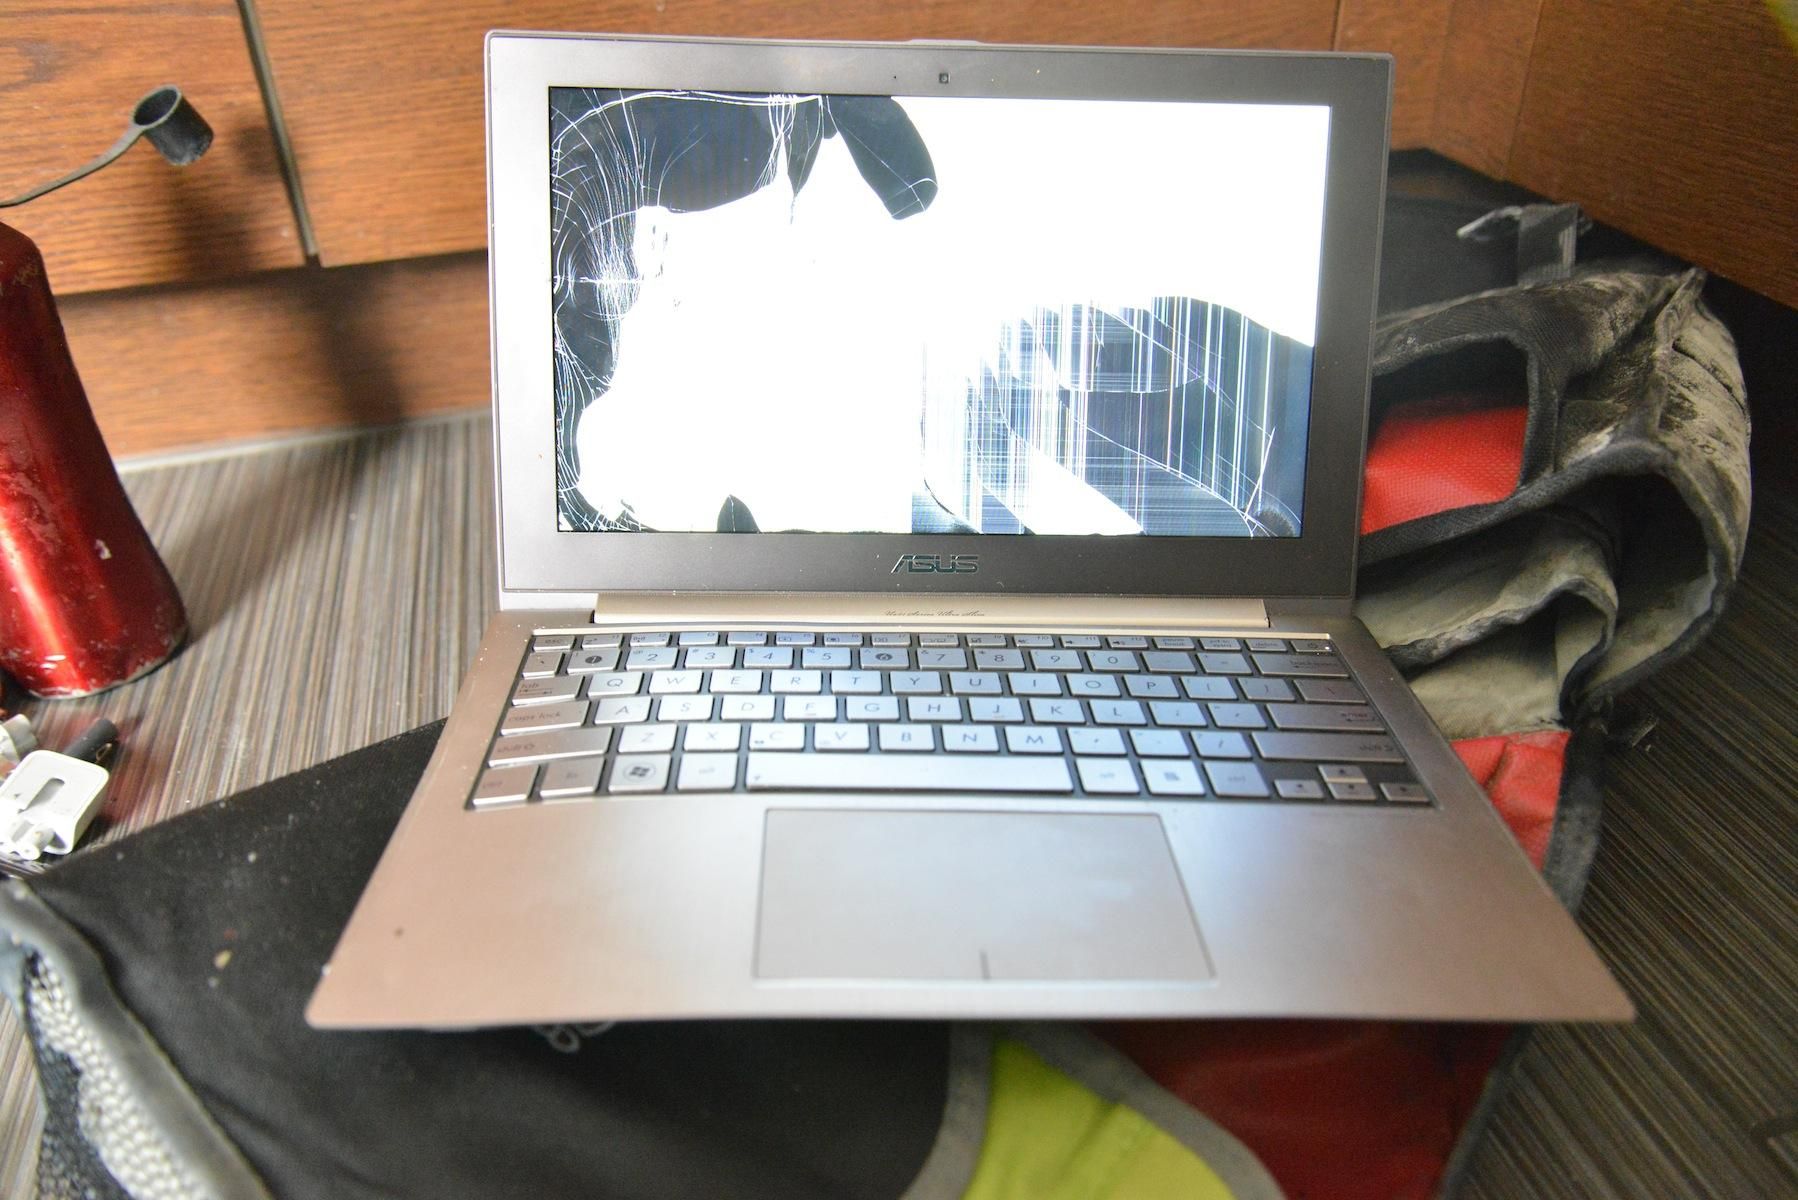 My Asus laptop faired less well after two days on the highway